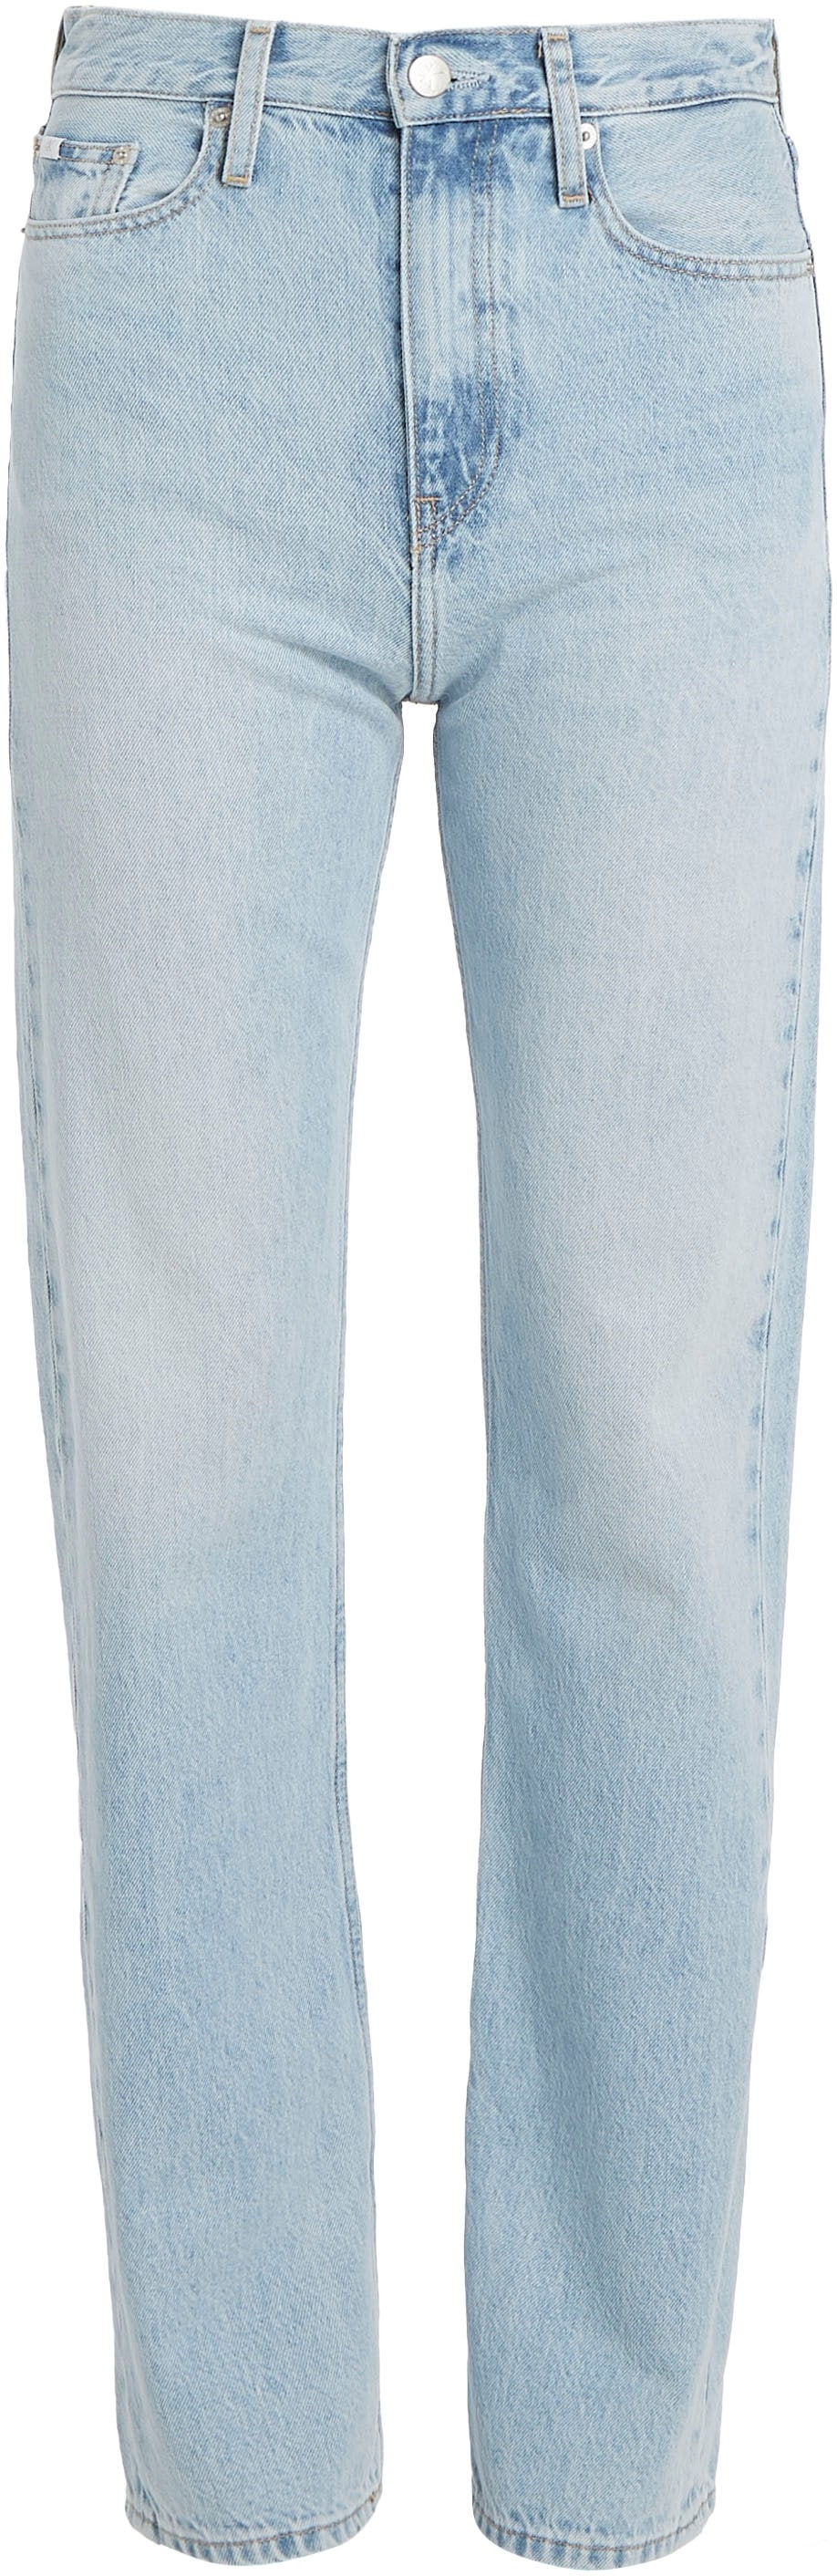 im »HIGH RISE Klein Jeans Straight-Jeans 5-Pocket-Style STRAIGHT«, Calvin ♕ bei